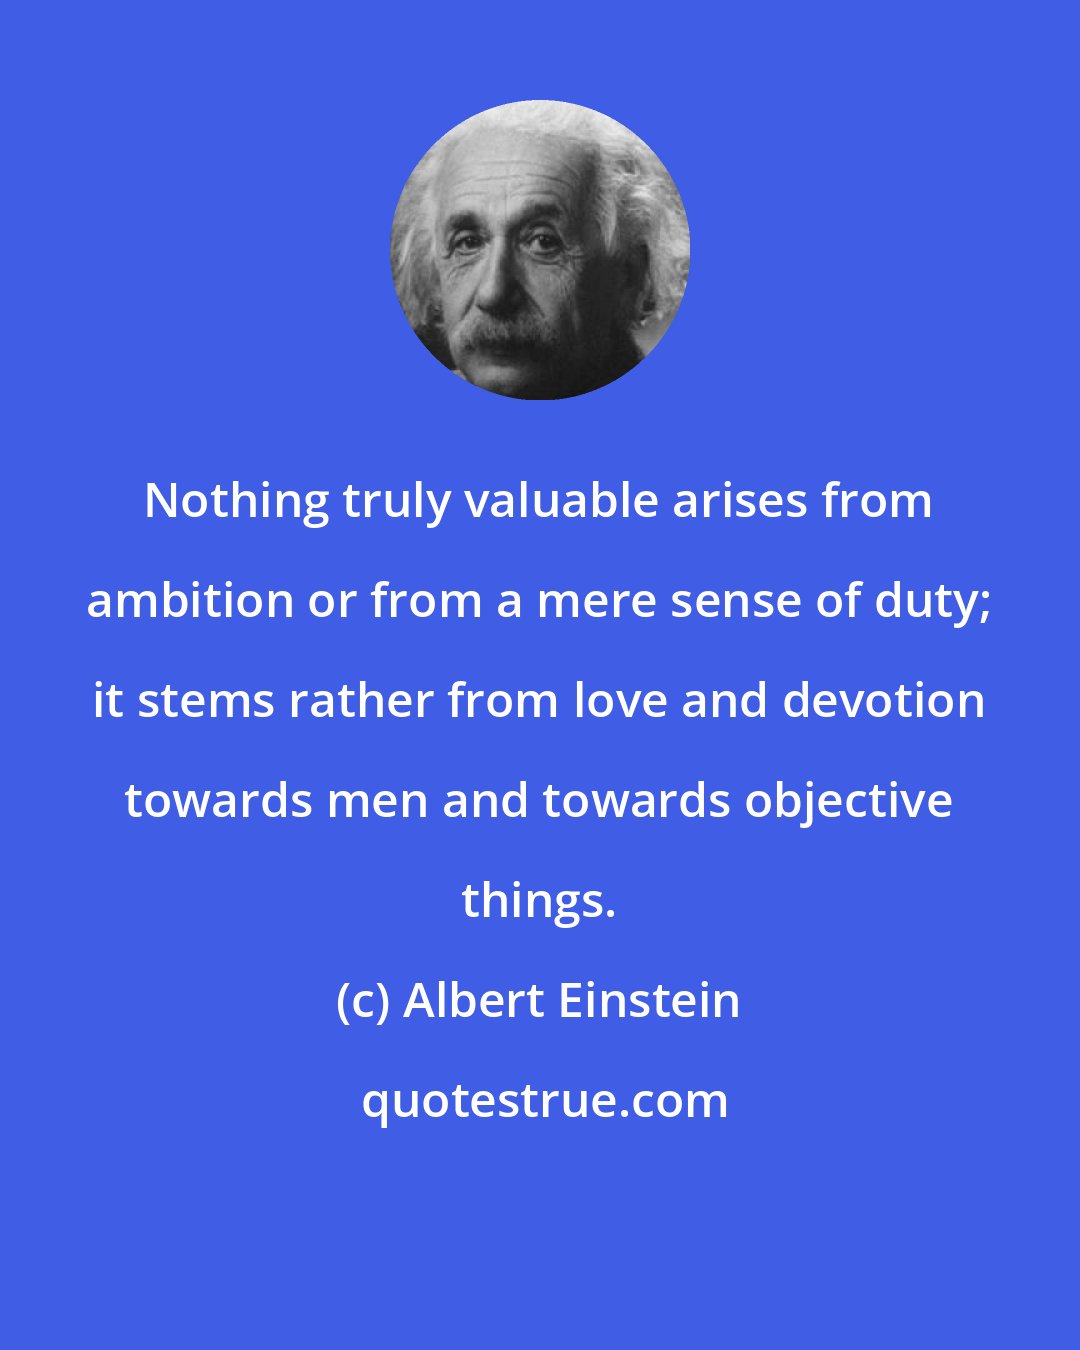 Albert Einstein: Nothing truly valuable arises from ambition or from a mere sense of duty; it stems rather from love and devotion towards men and towards objective things.